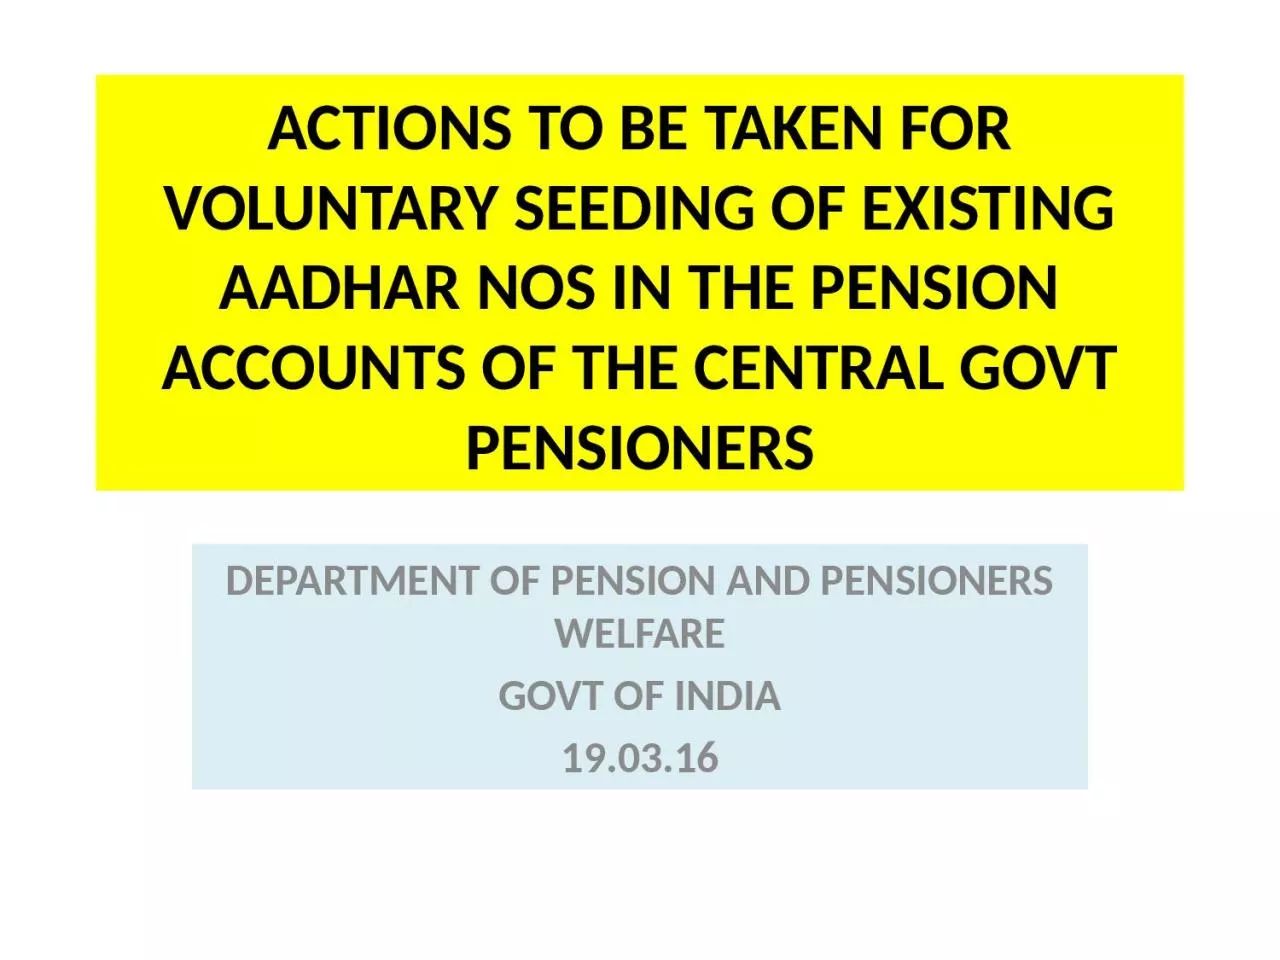 ACTIONS TO BE TAKEN FOR VOLUNTARY SEEDING OF EXISTING AADHAR NOS IN THE PENSION ACCOUNTS